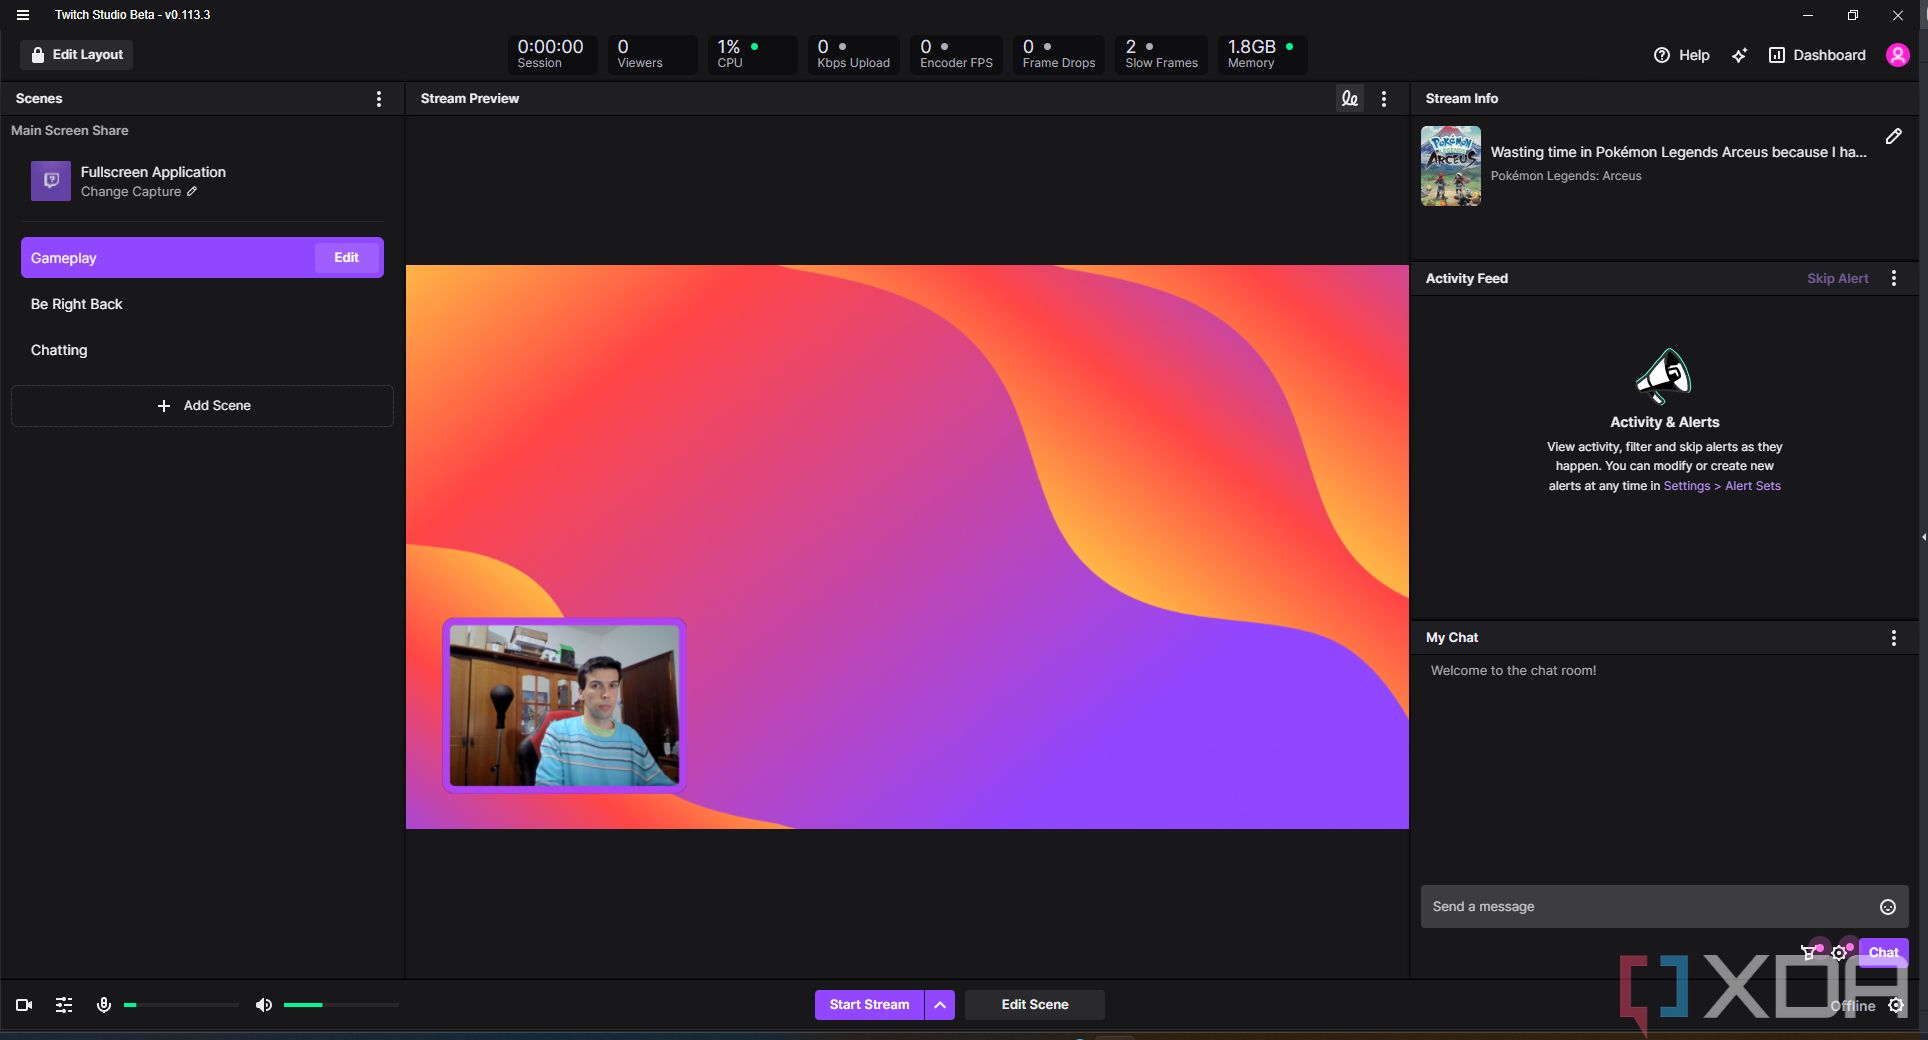 Screenshot of the main interface in Twitch Studio showing the current stream setup